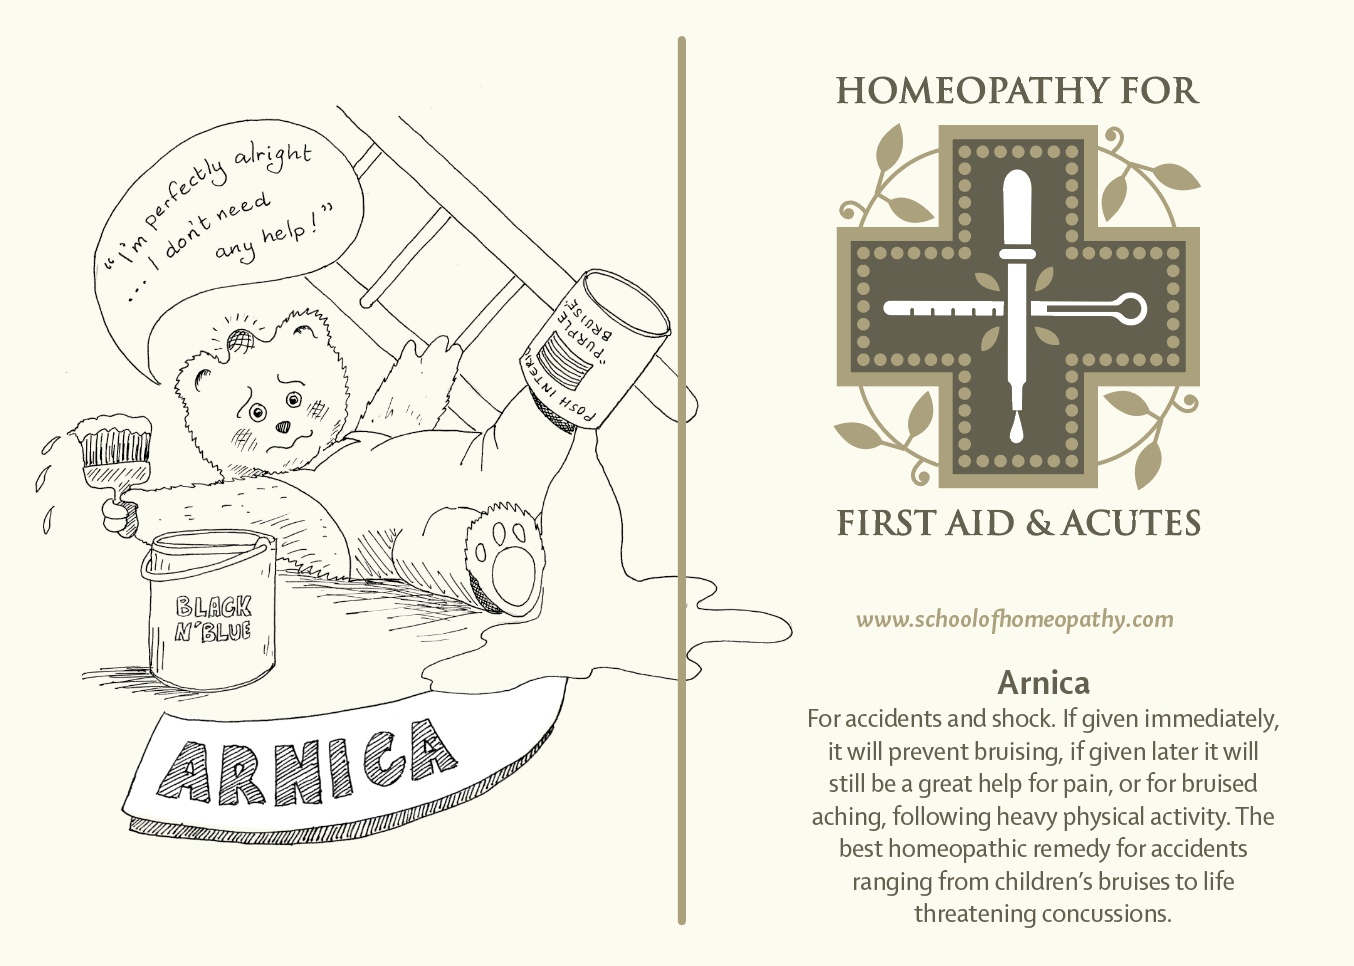 Homeopathy for First Aid & Acutes - Arnica